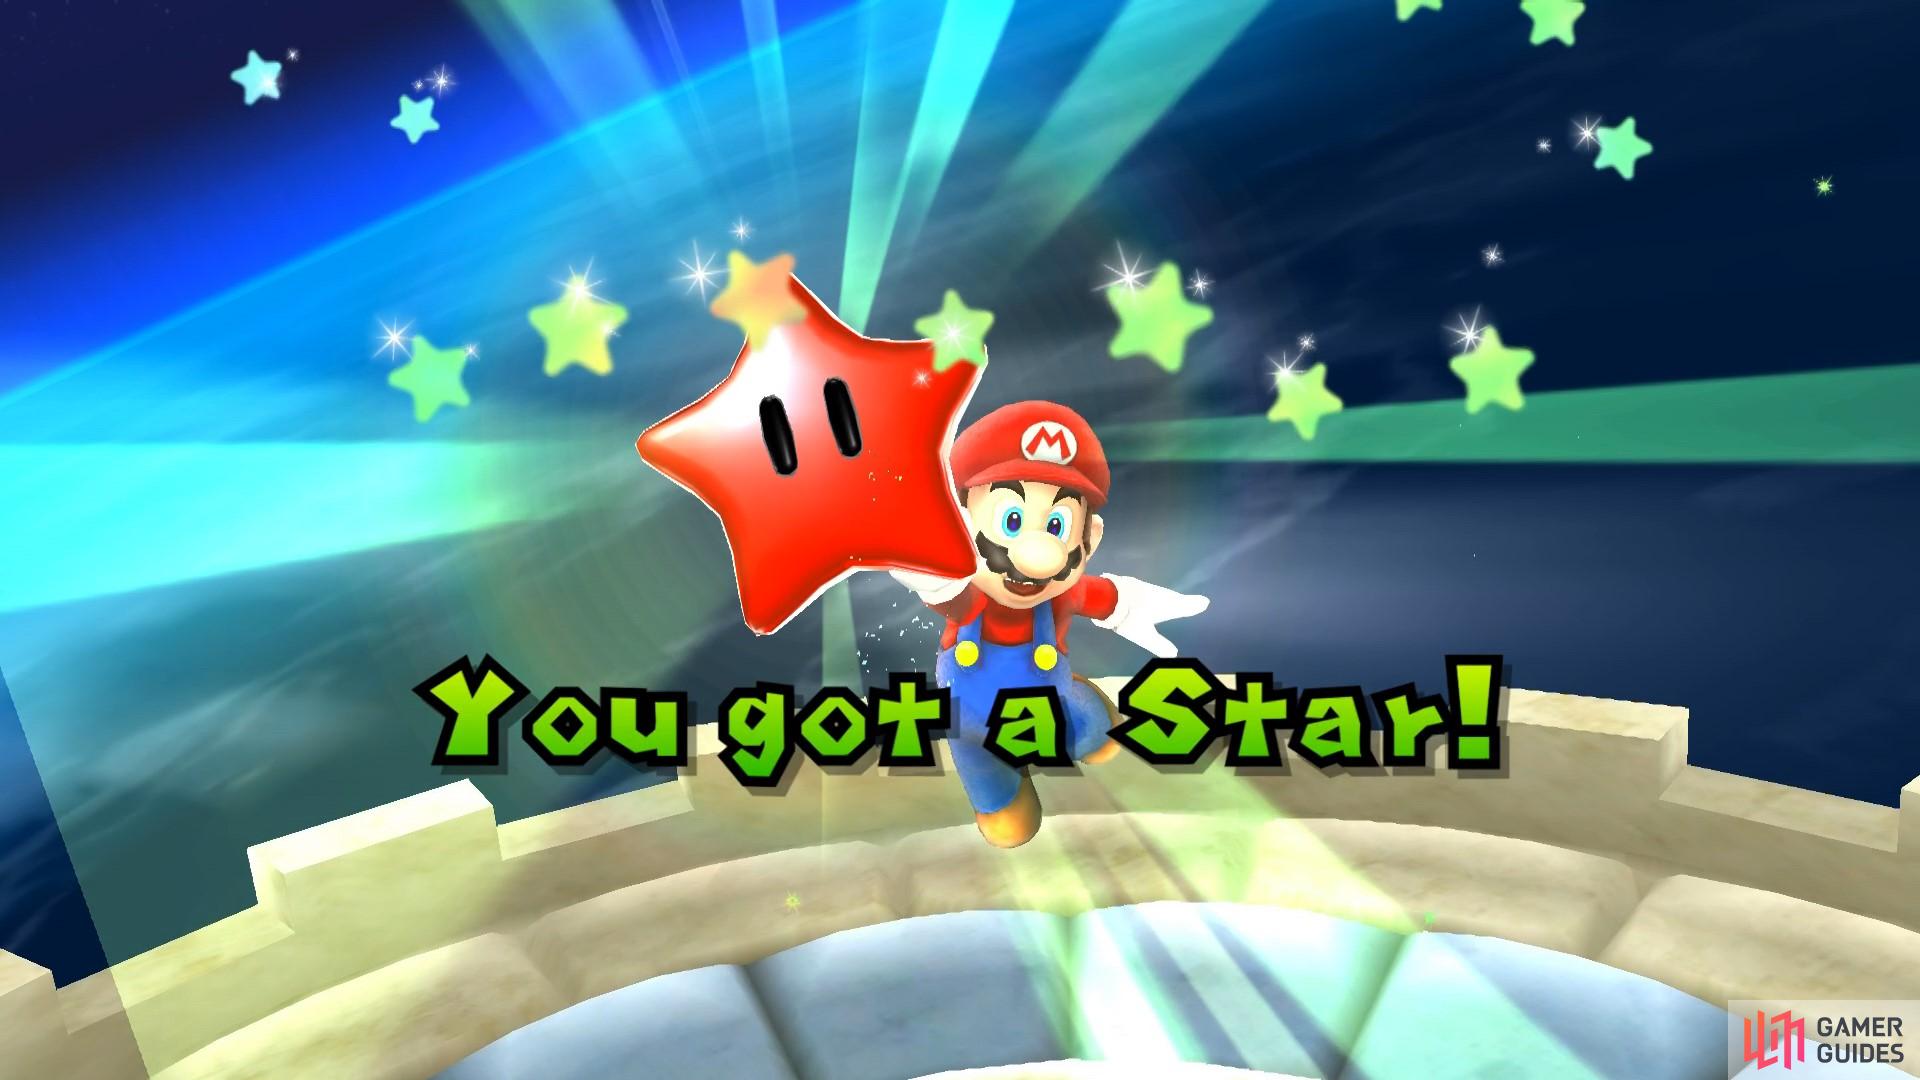 Once you’ve collected all 100 coins, you’ll earn a Red Power Star!